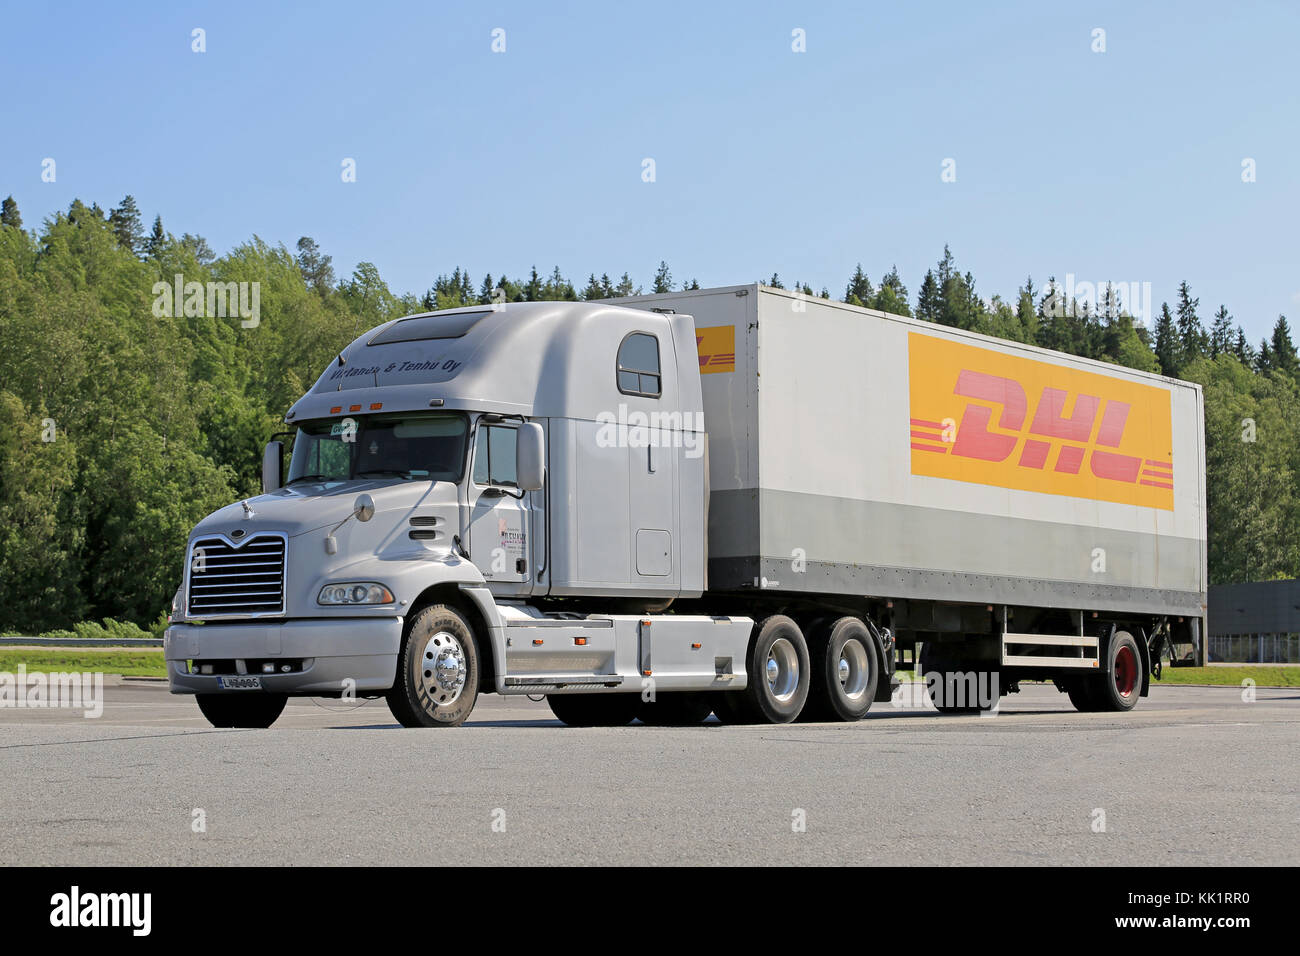 FORSSA, FINLAND - JULY 4, 2015: Conventional Mack Vision semi truck parked. Mack trucks are uncommon in Finland. Stock Photo